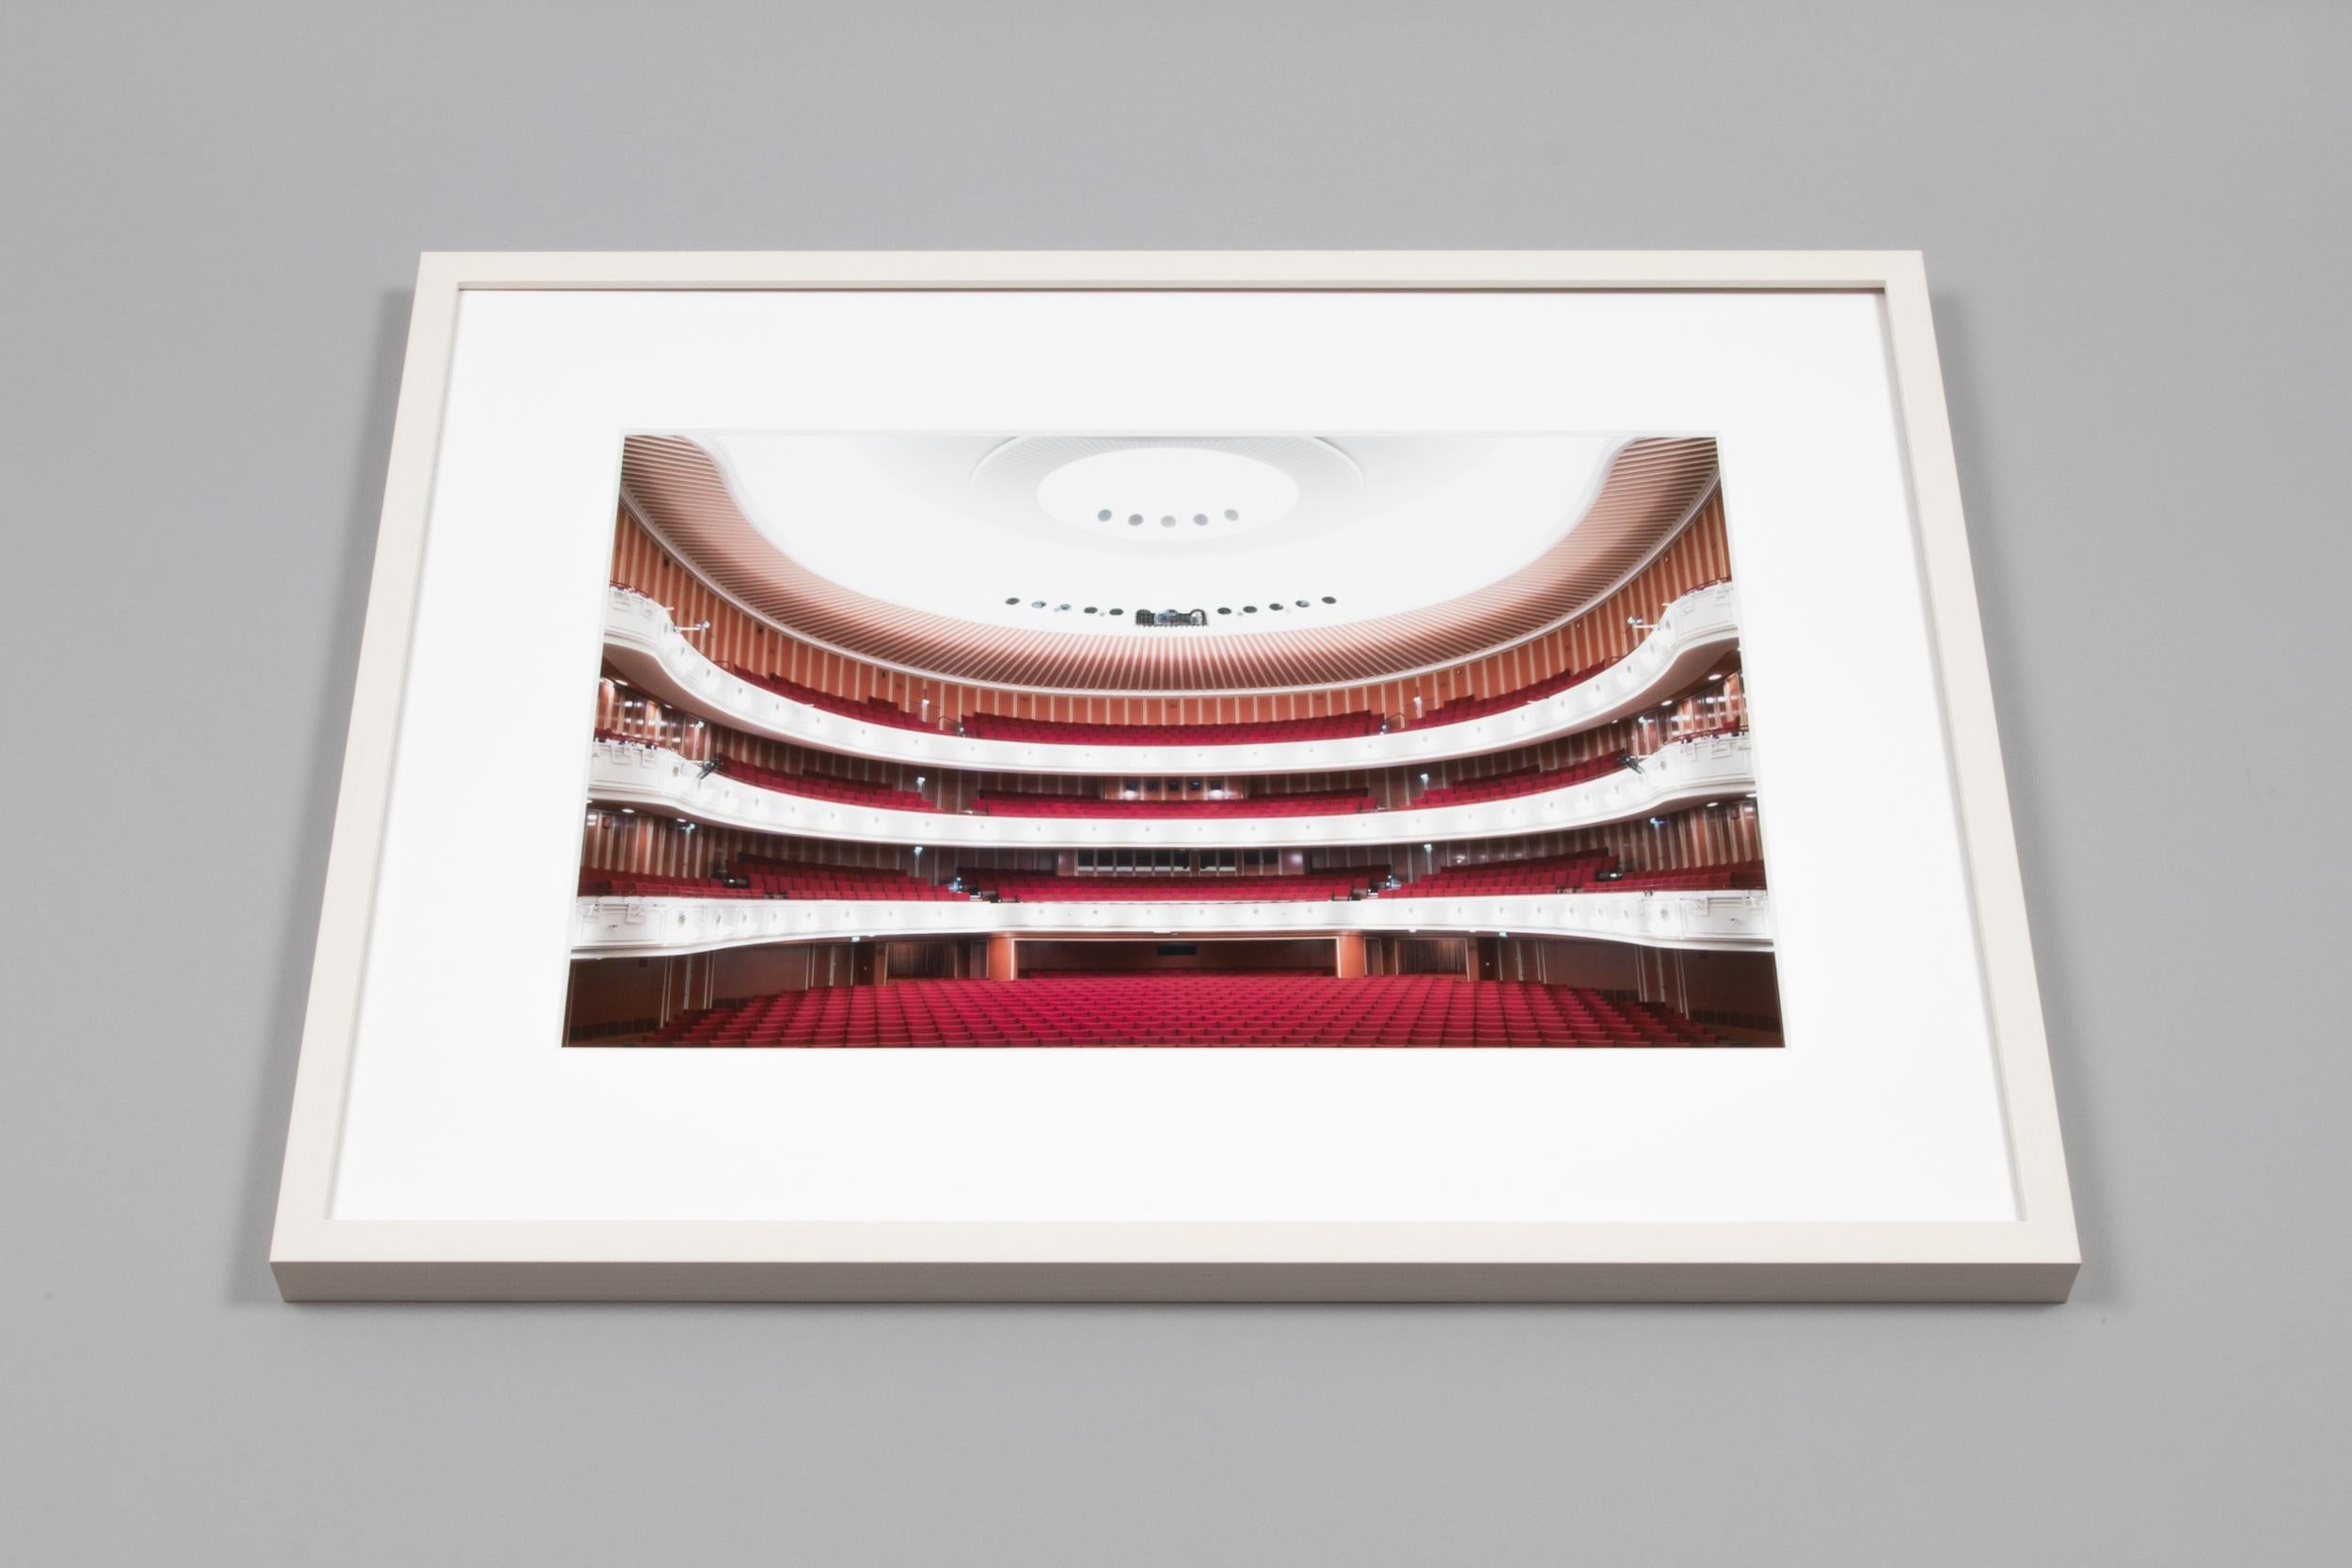 Candida Höfer, Deutsche Oper - Signed C-Print, Contemporary Photography - Gray Color Photograph by Candida Hofer